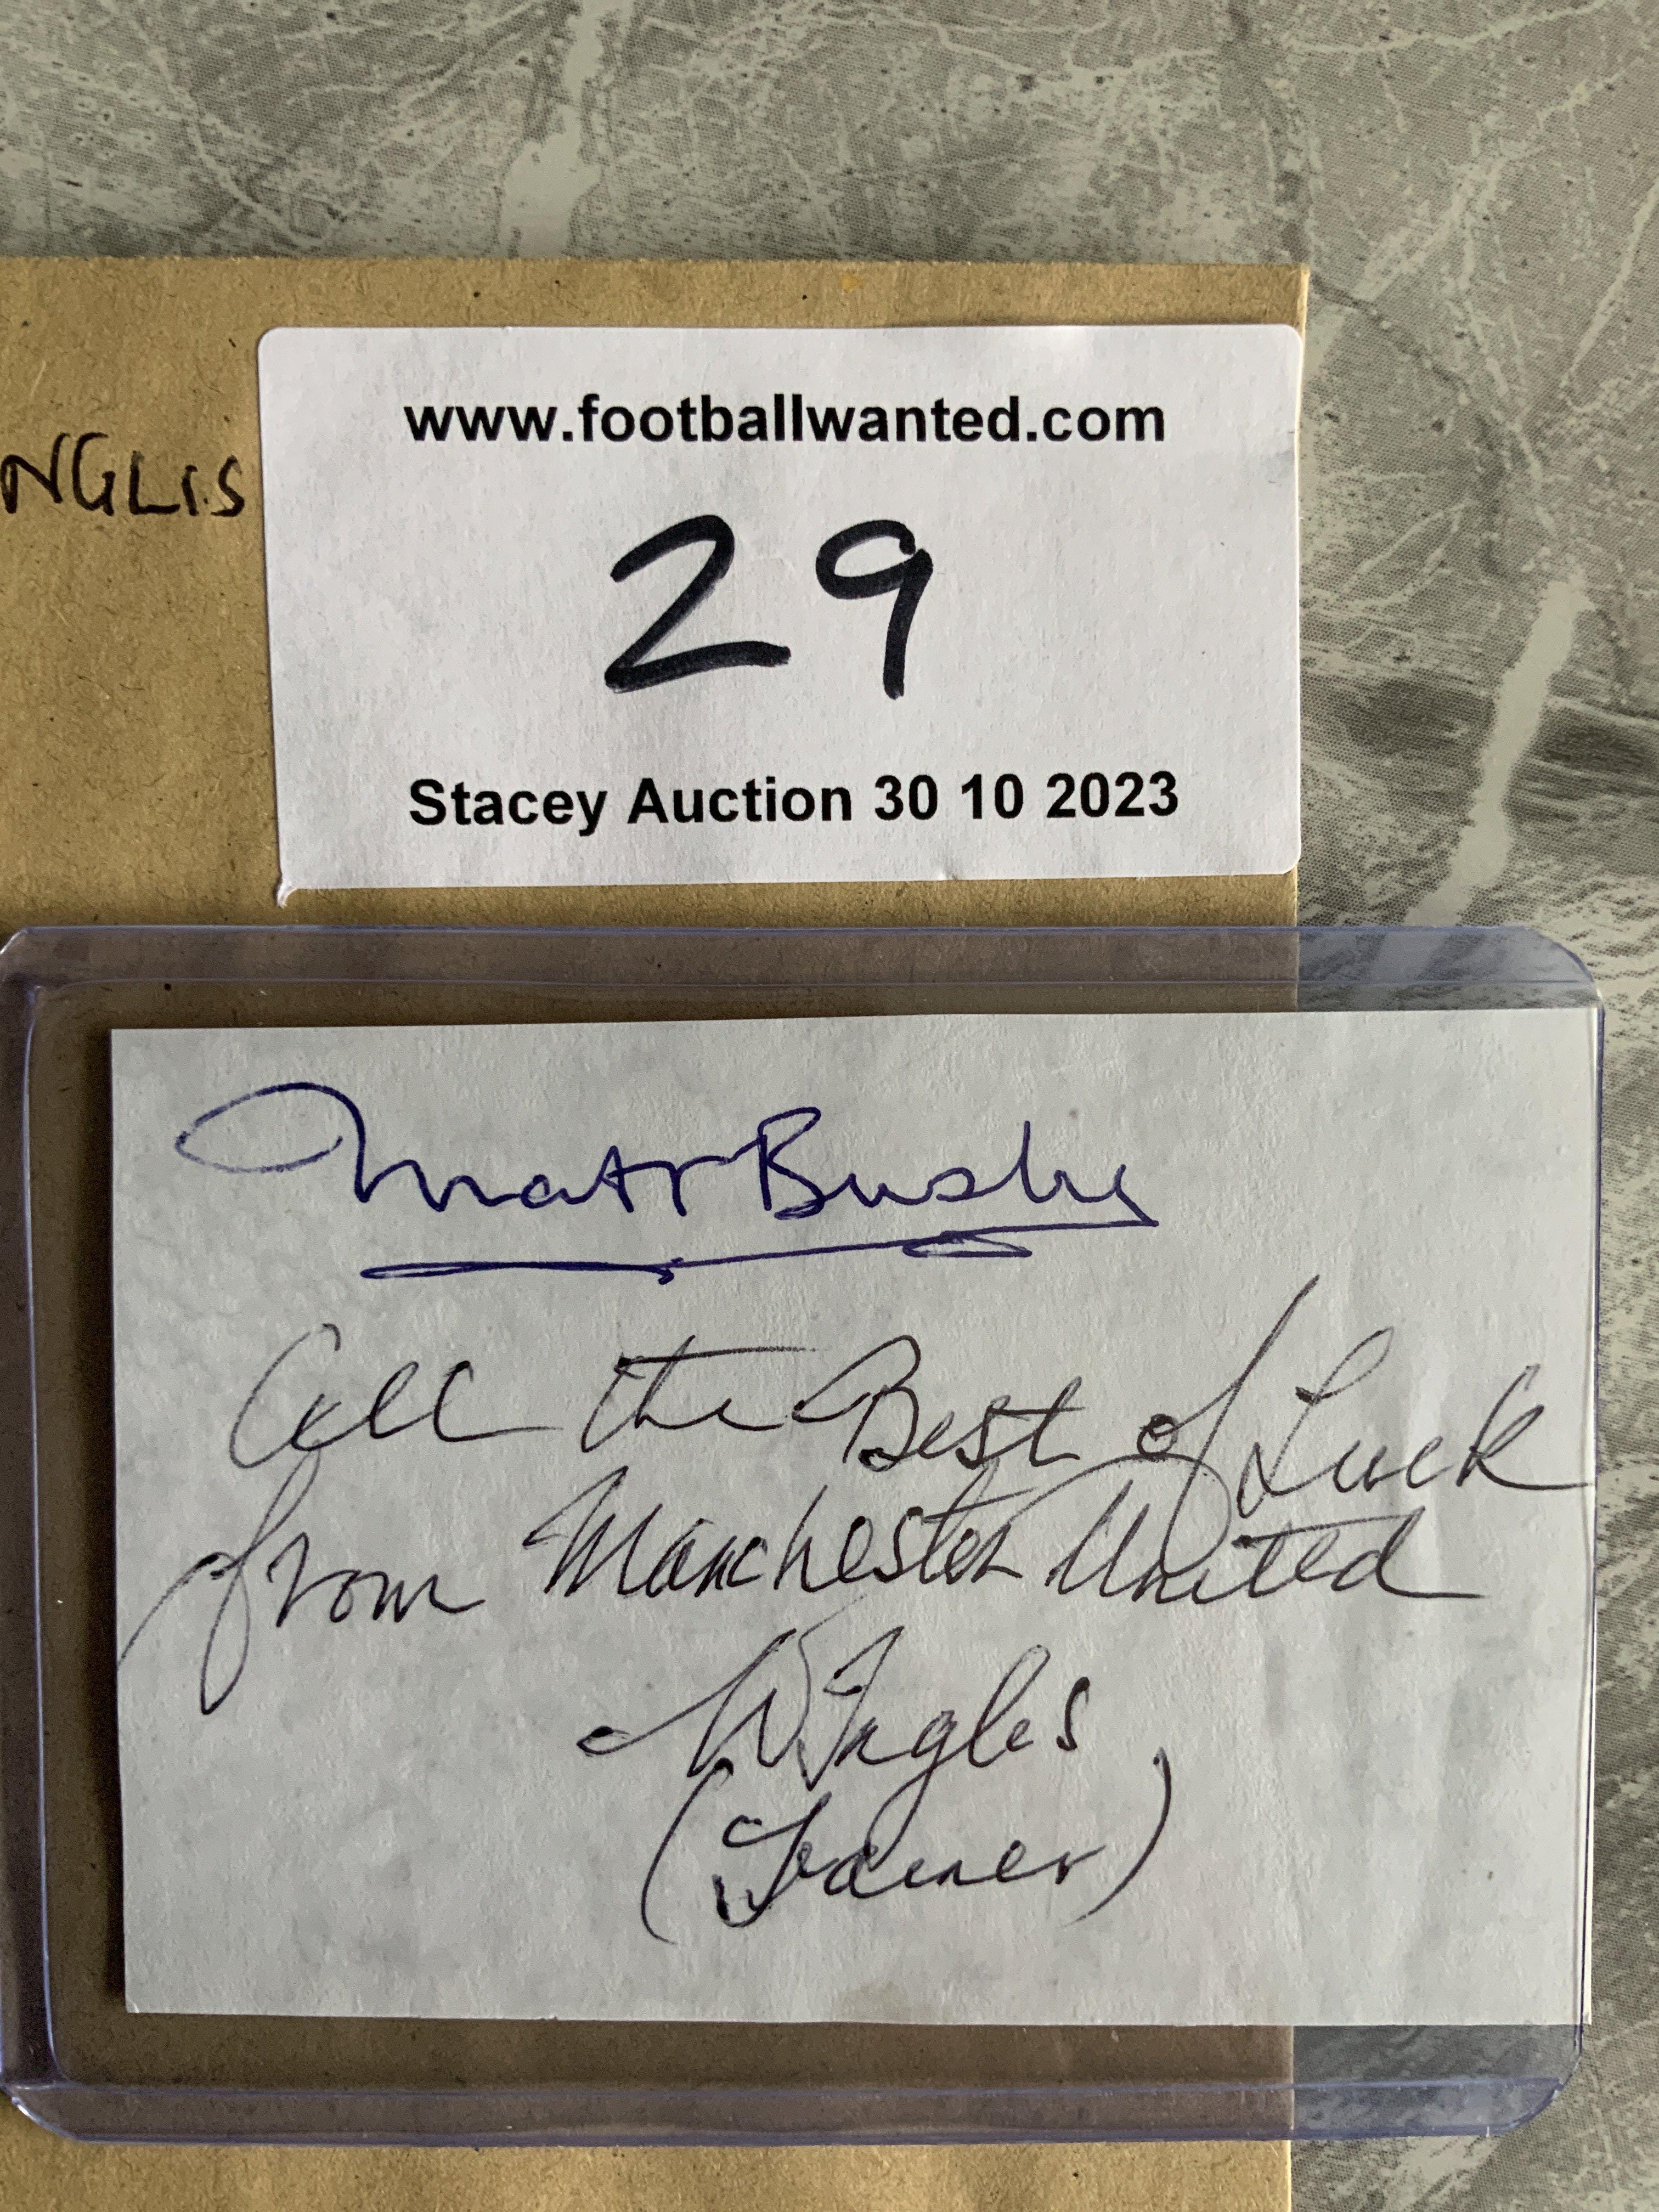 Busby + Inglis Signed Manchester United Card: Mana